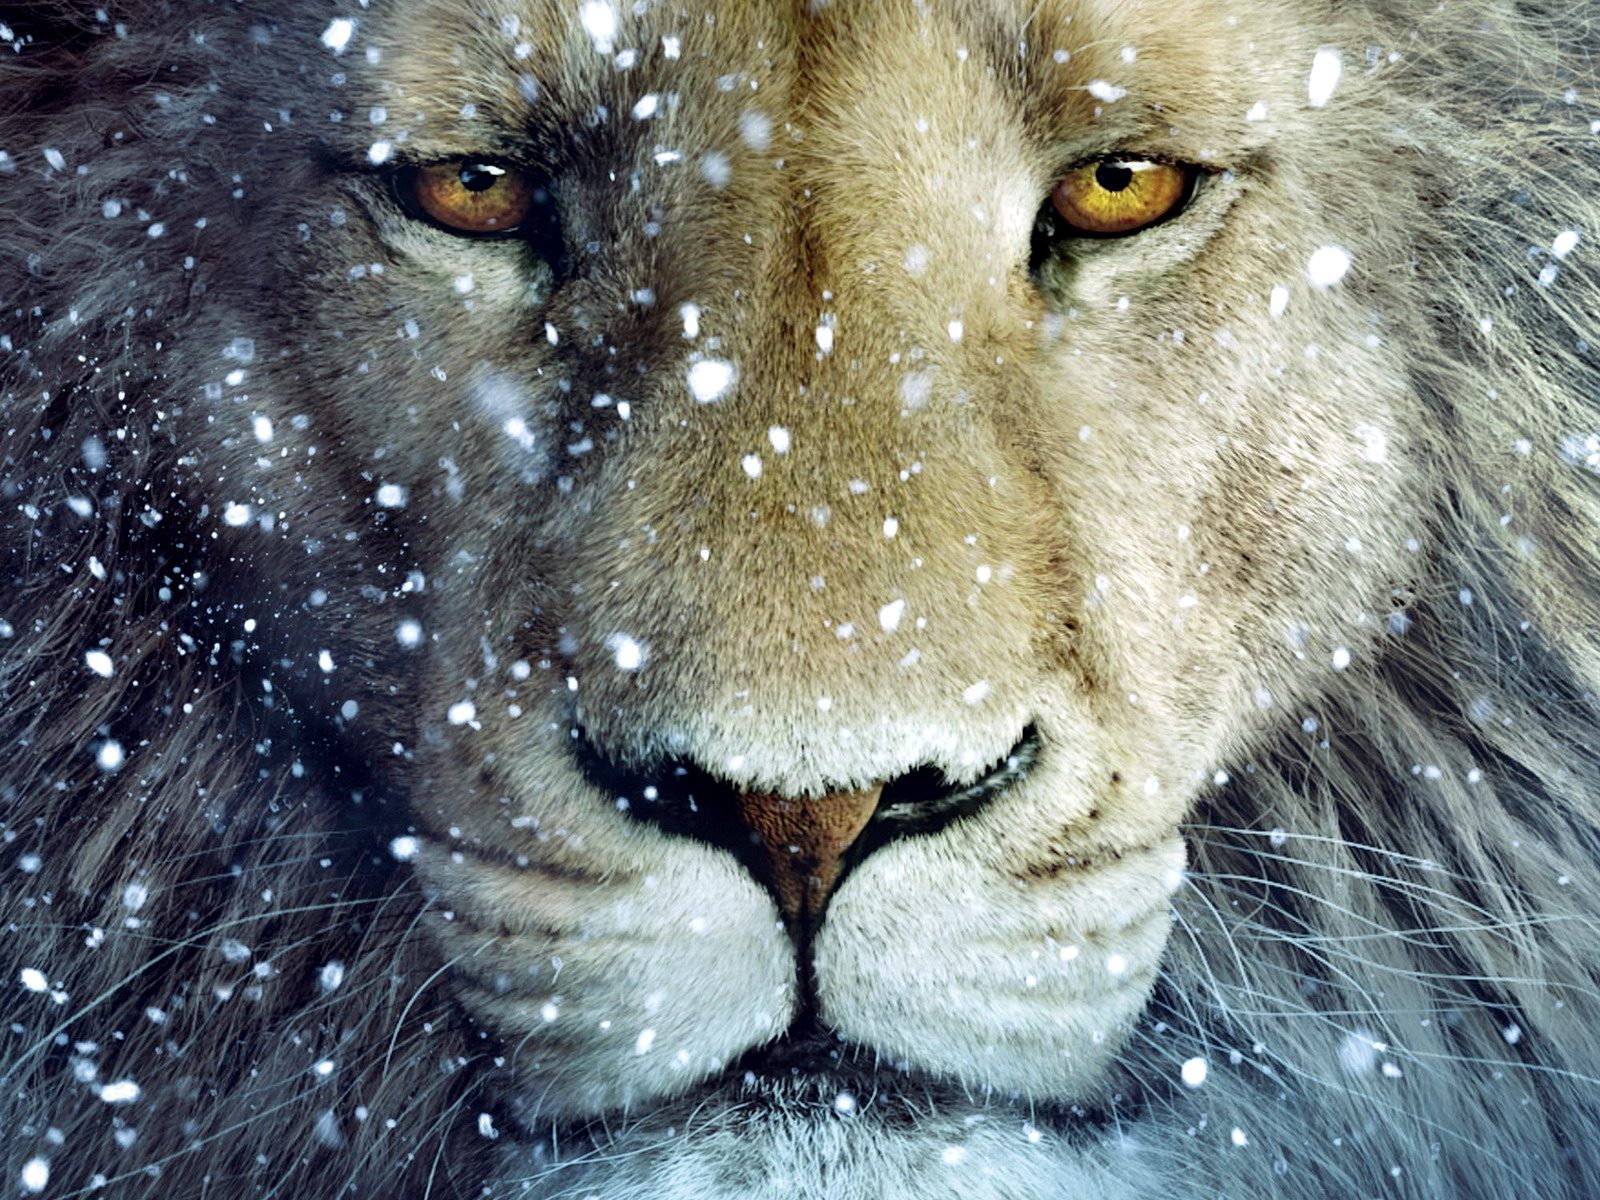 Aslan The Lion From Chronicles Of Narnia Wallpaper